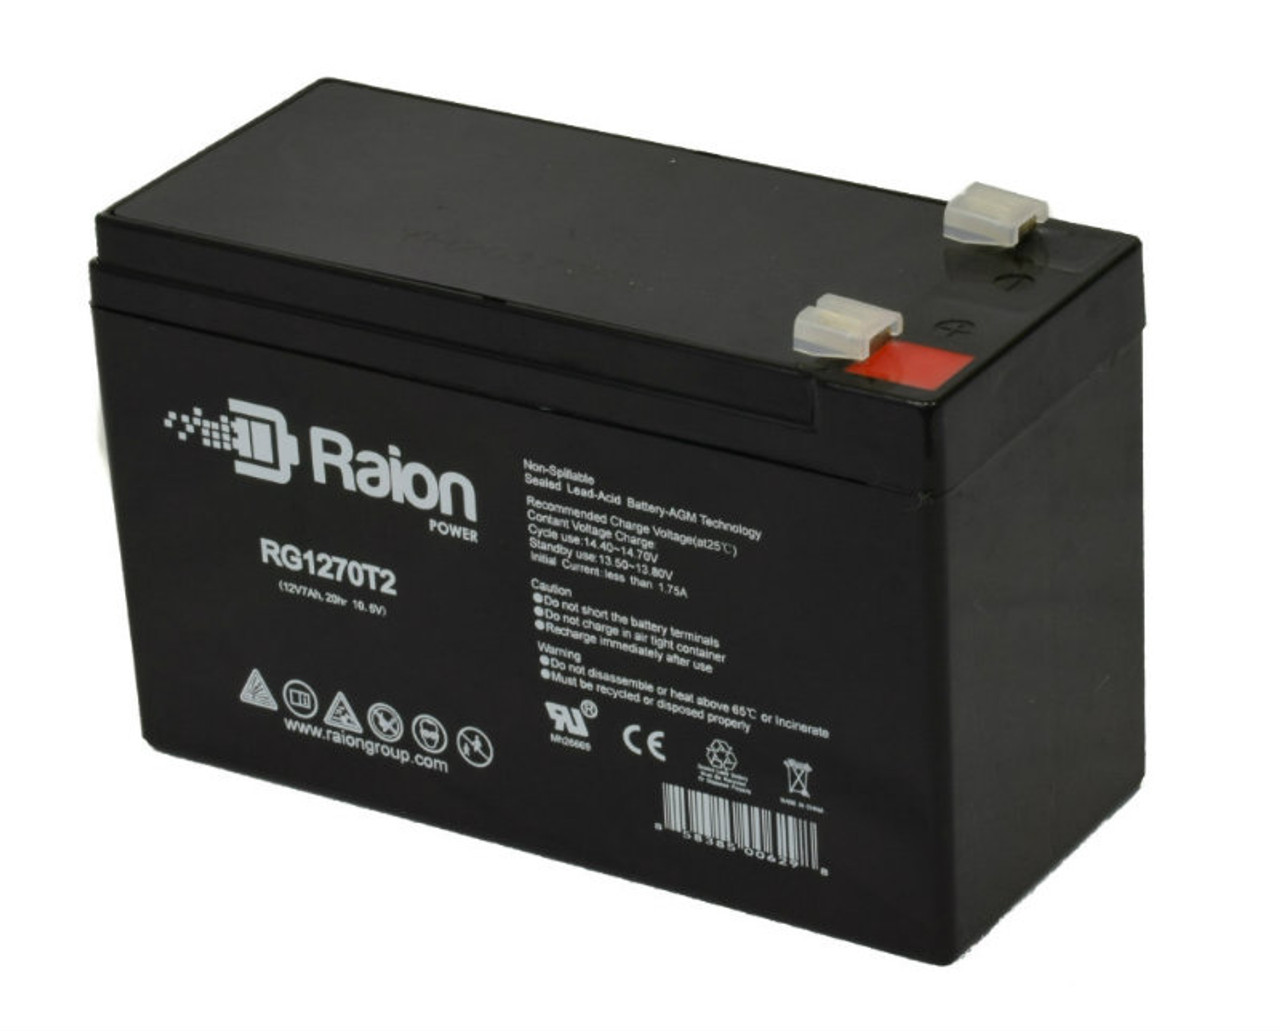 Raion Power RG1270T2 12V 7Ah Lead Acid Battery for Mongoose Micro-3 Scooter